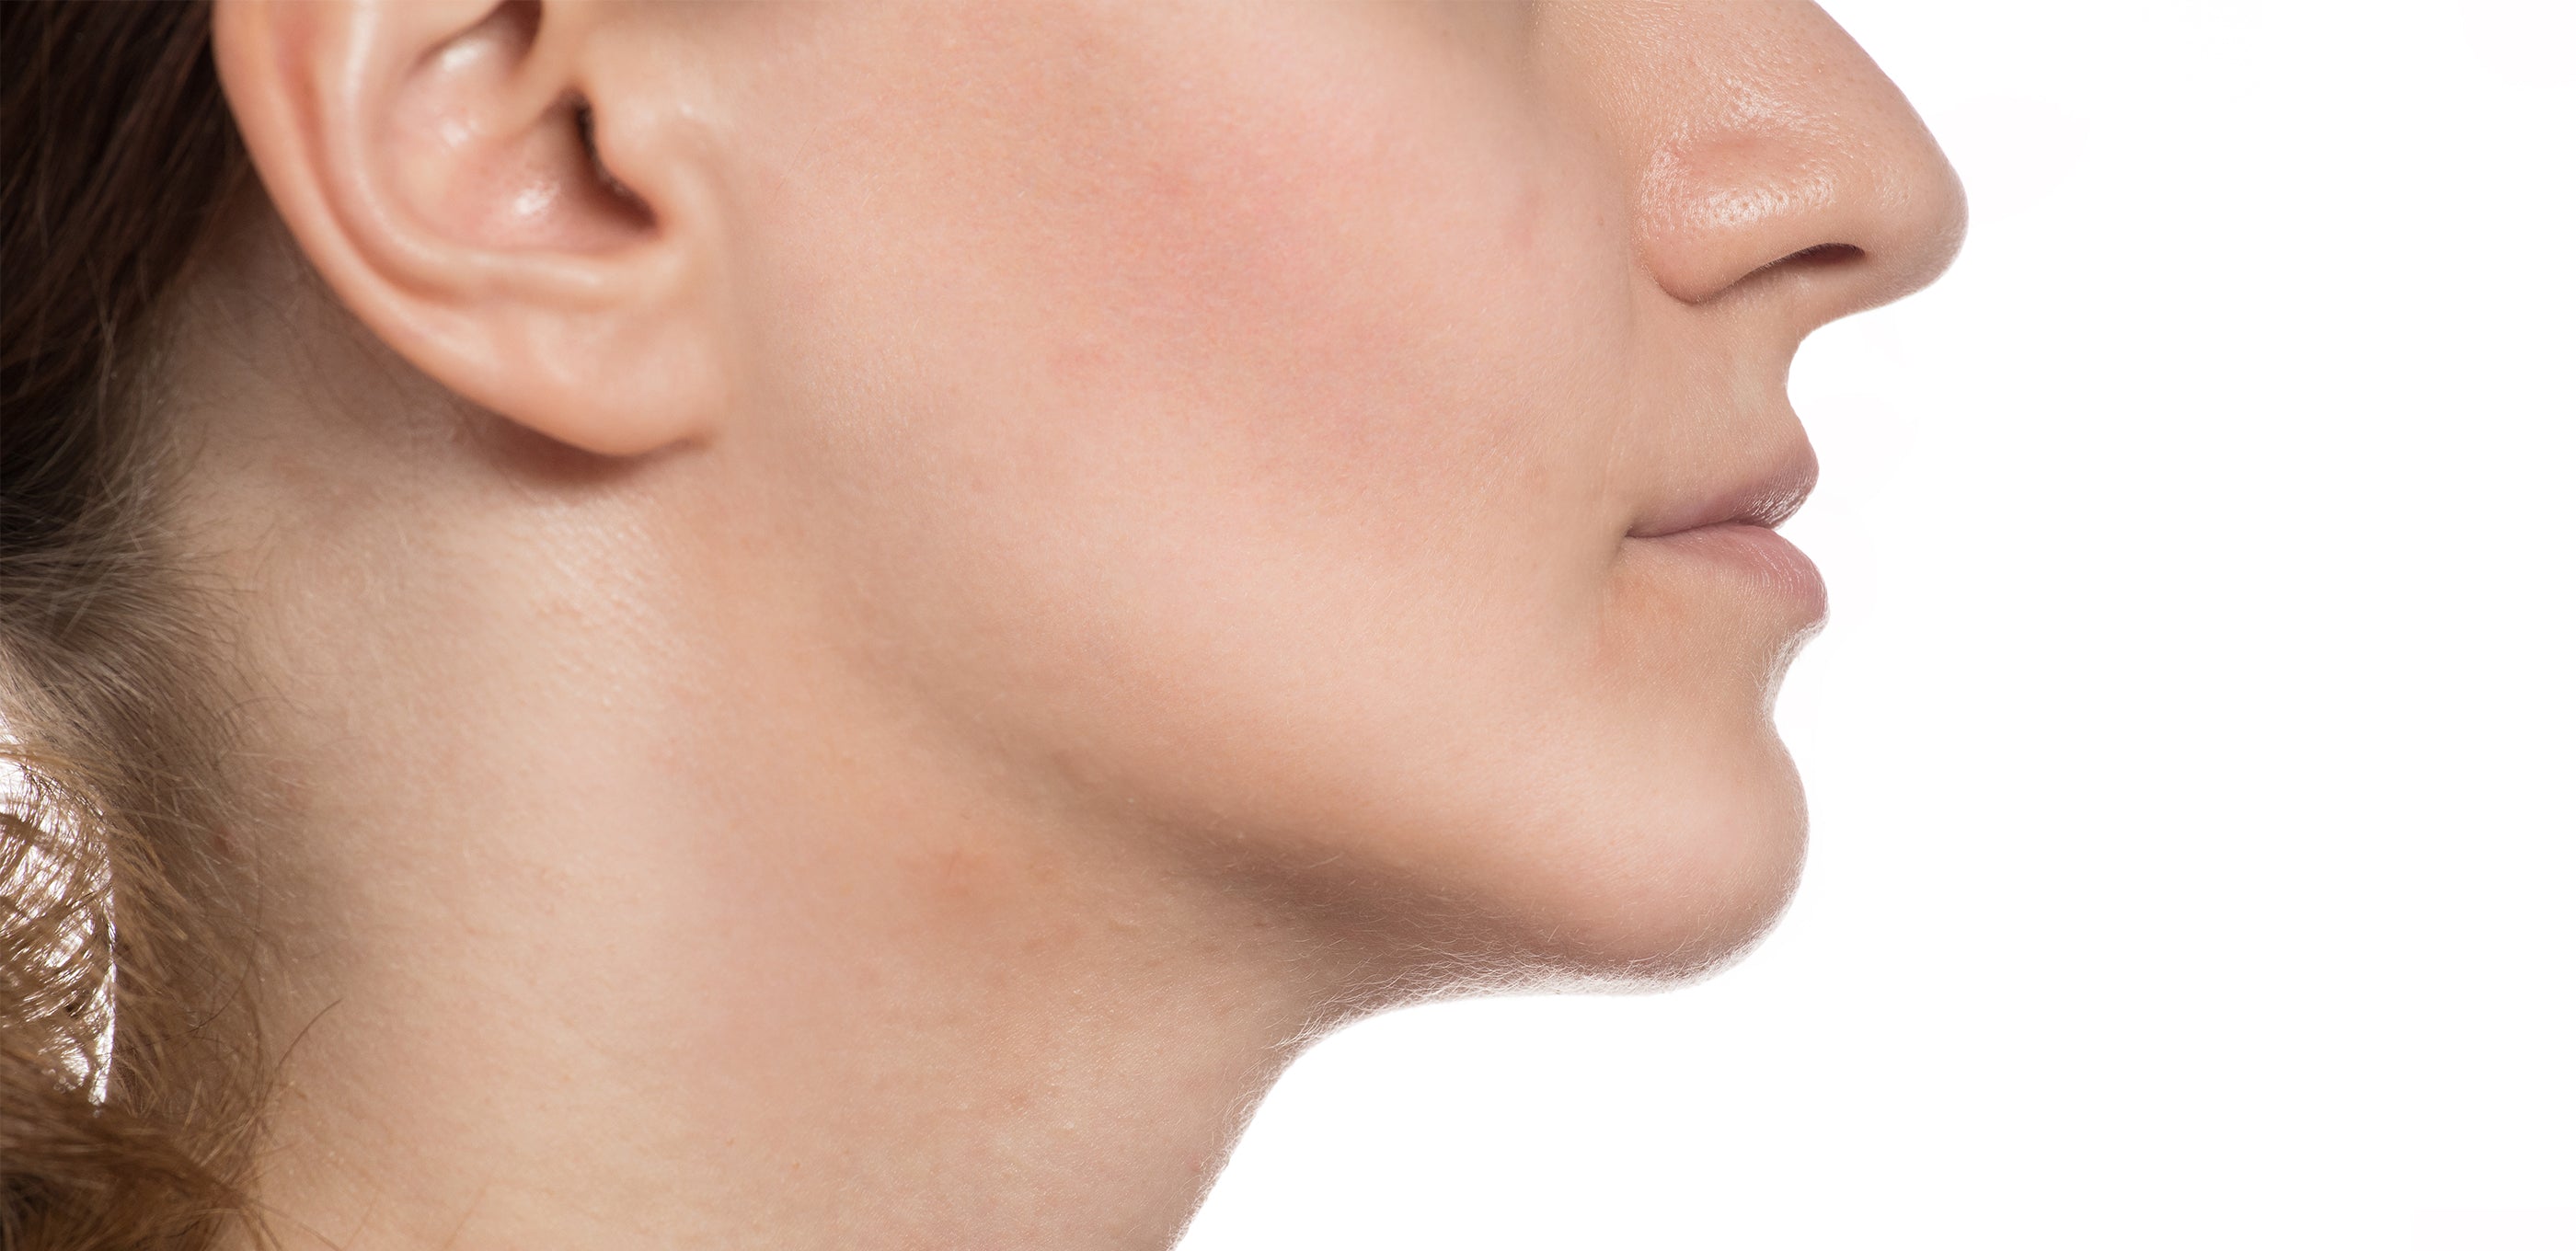 Side profile of a woman's face showing visible improvement in acne after using JOVS LED therapy patches.